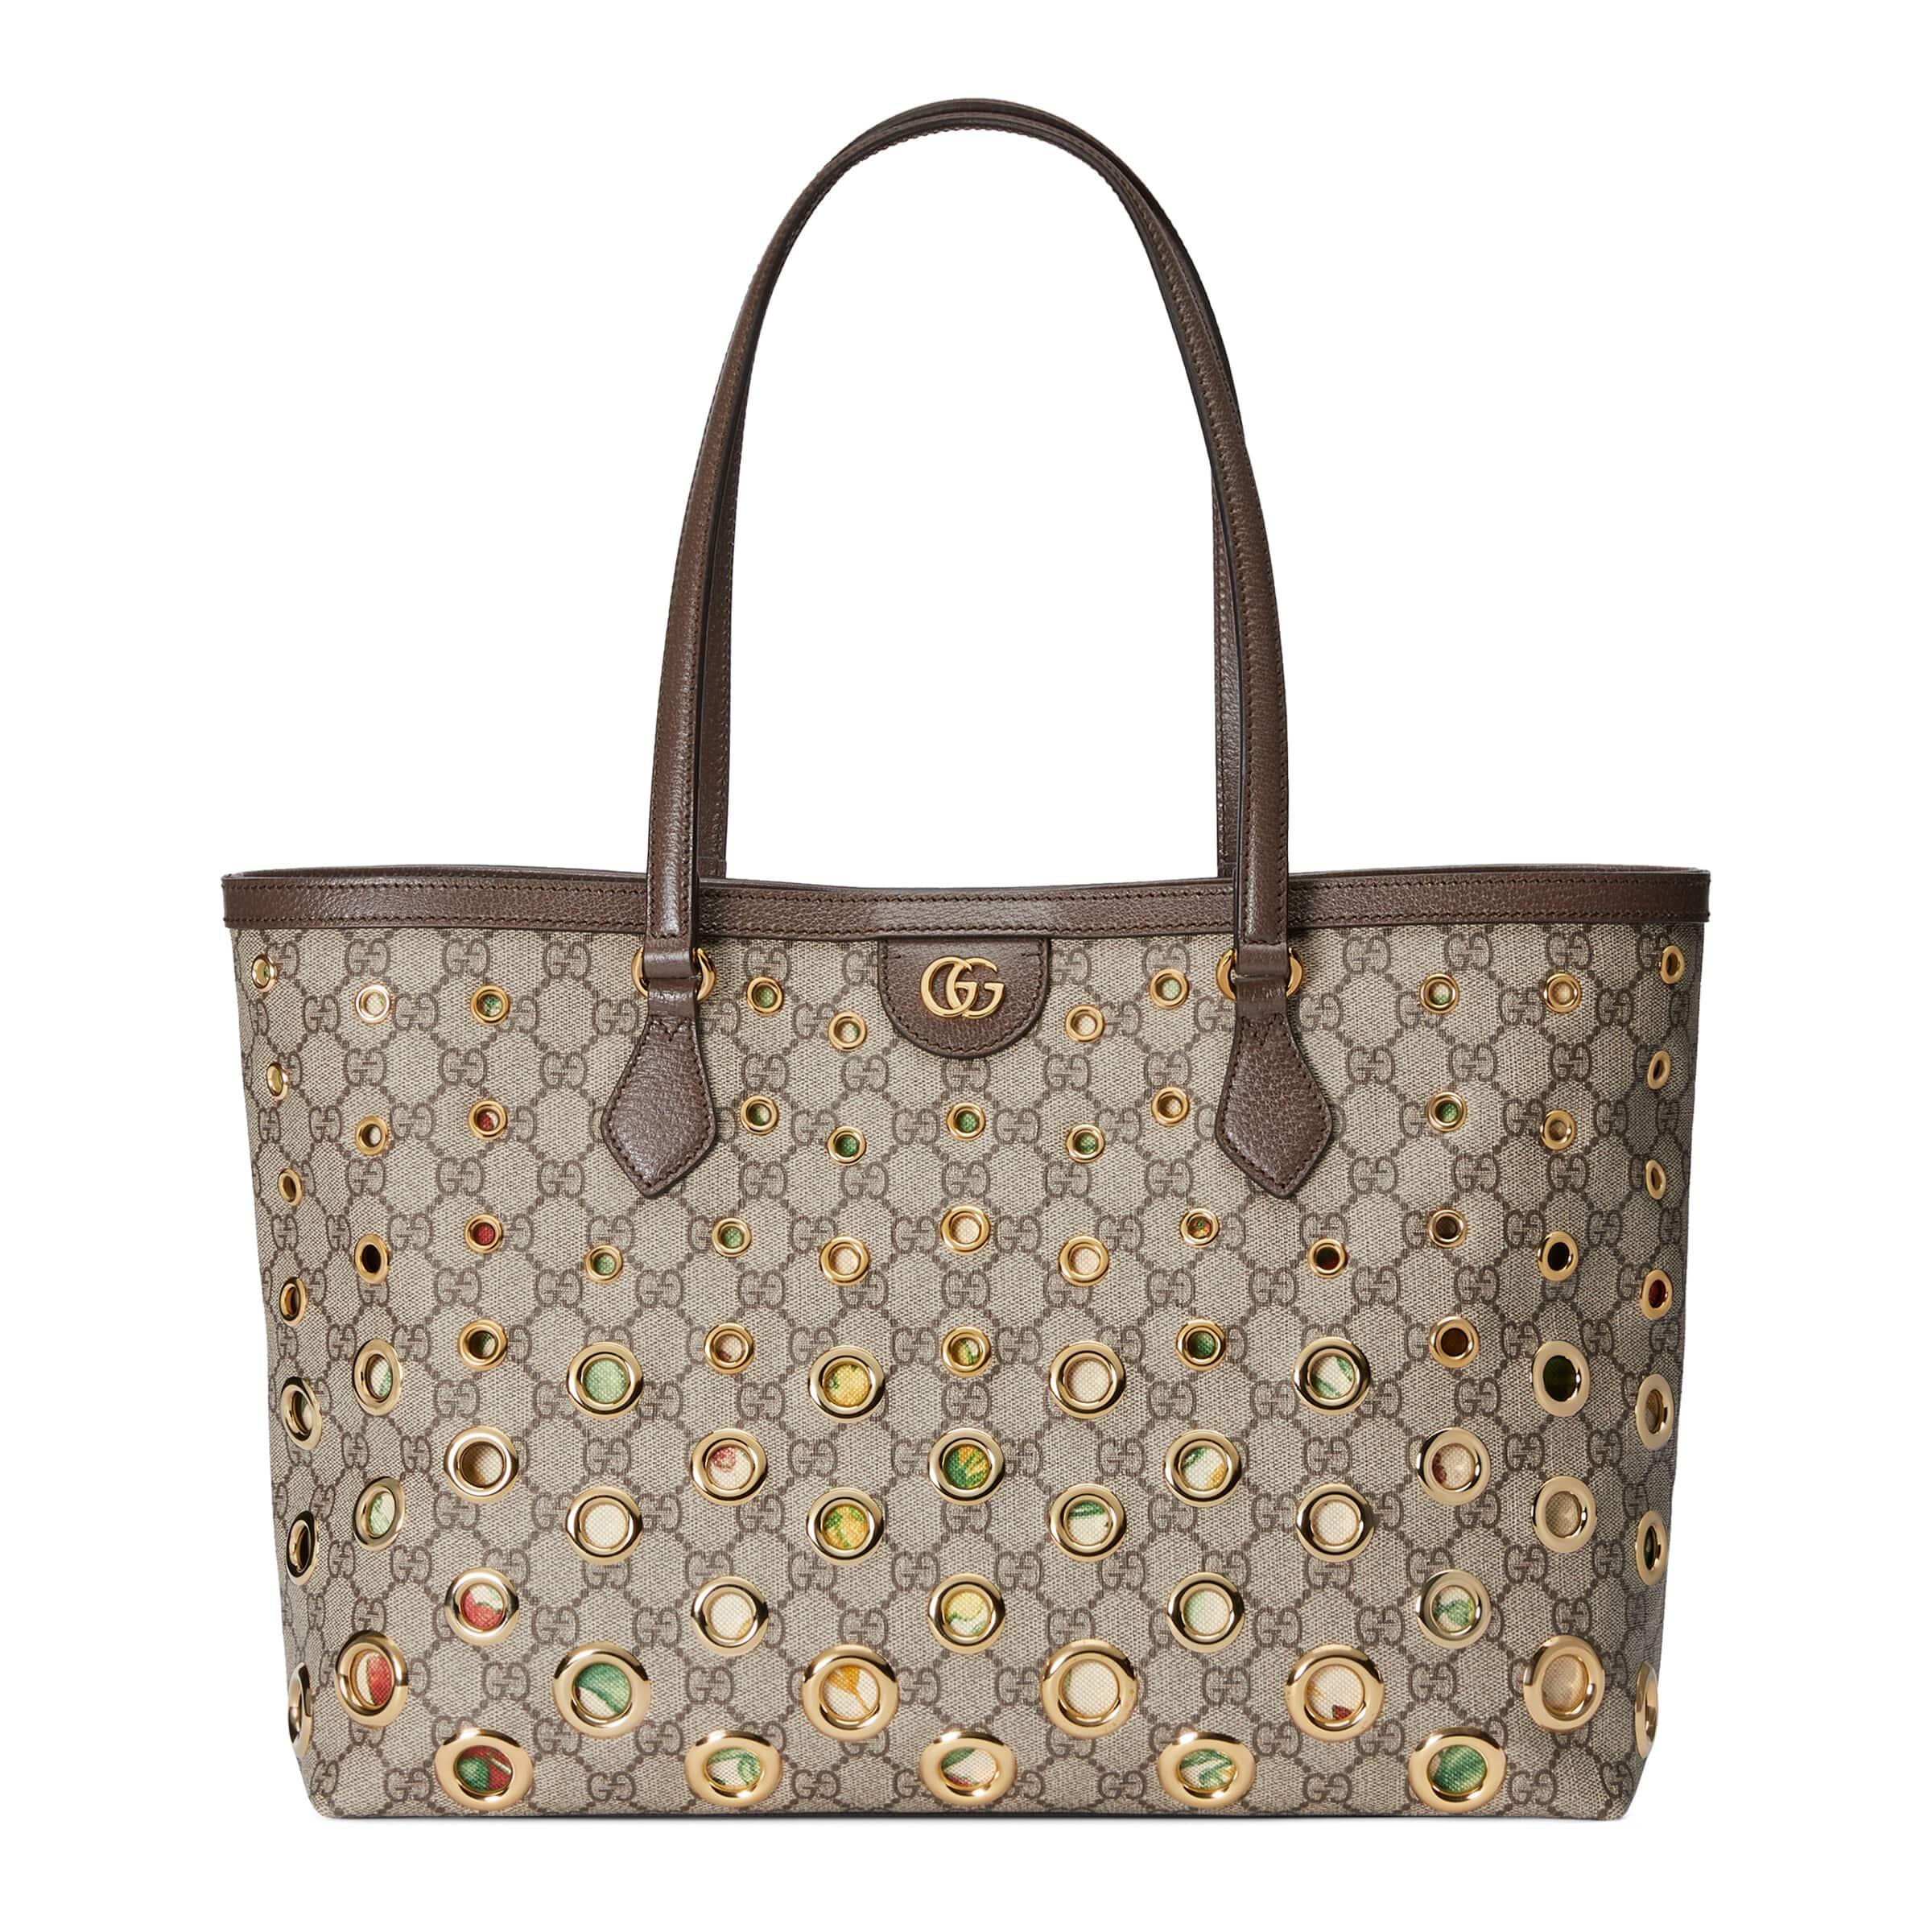 Gucci Ophidia GG Eyelet Medium Tote in Natural | Lyst